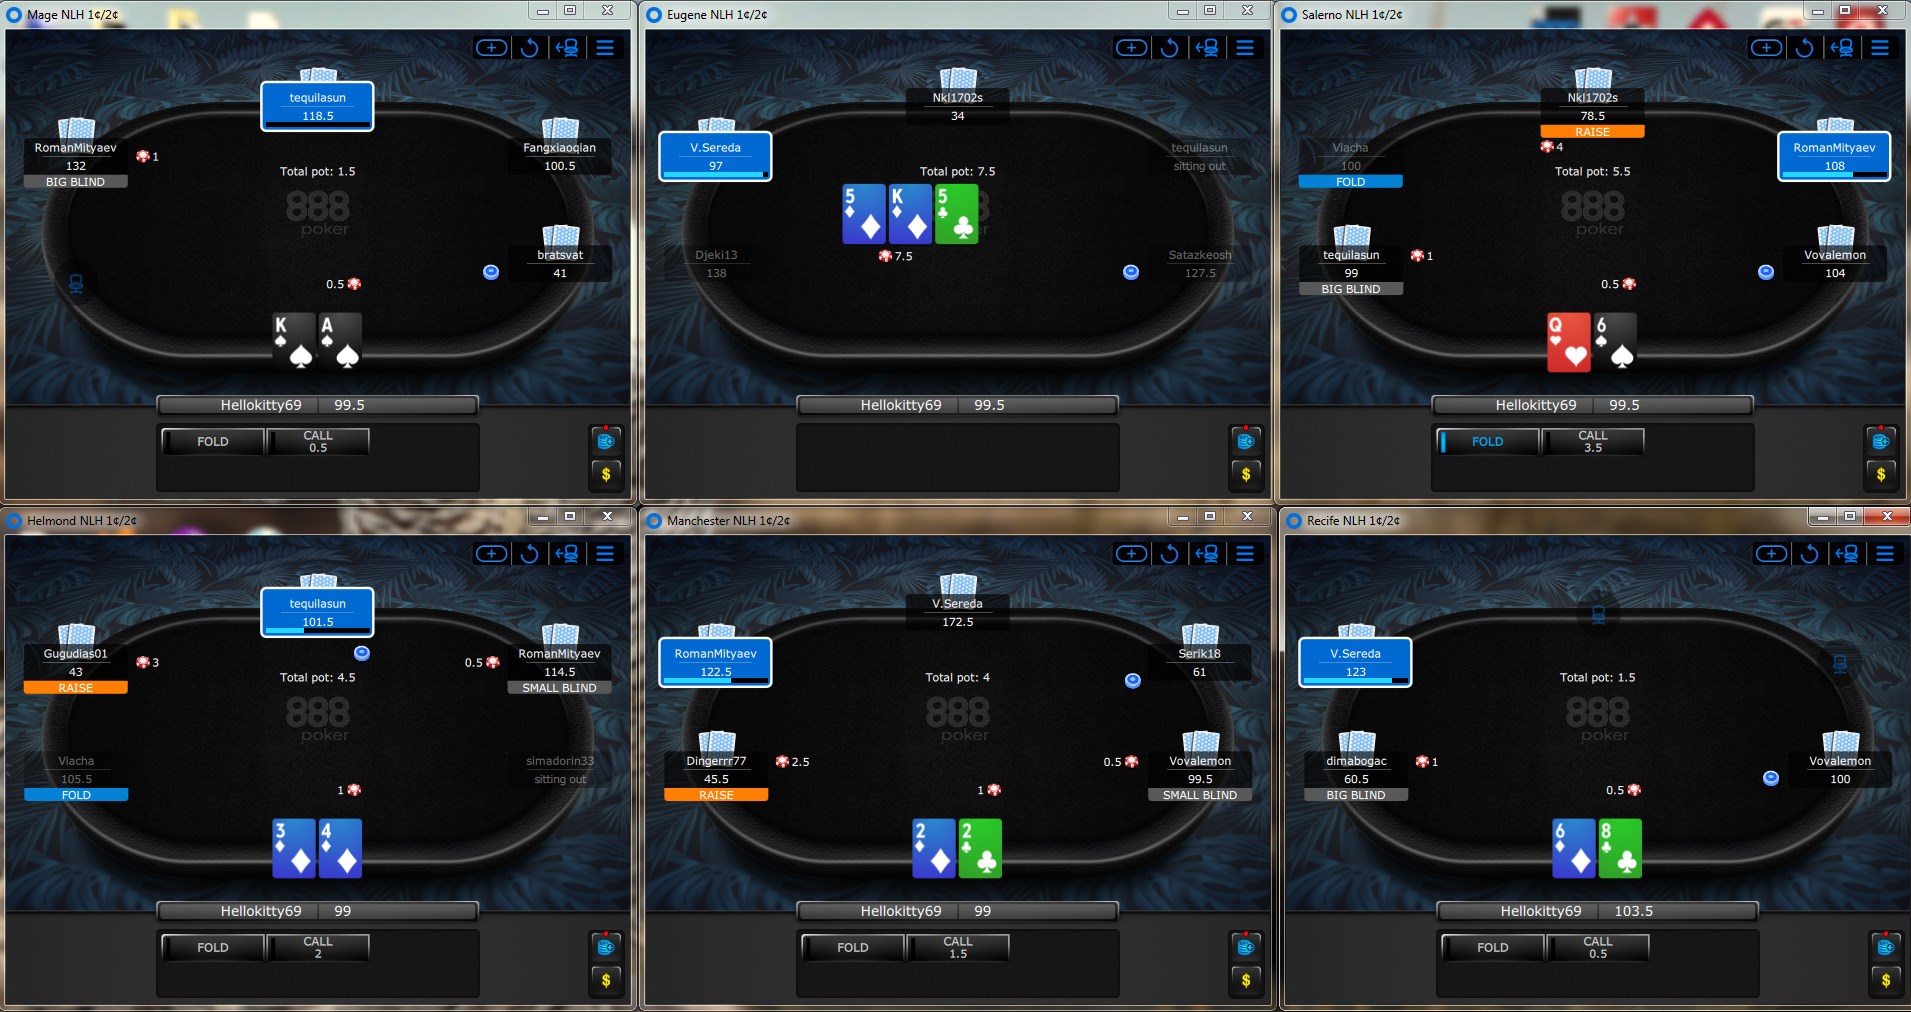 The 888 Poker client update made the room more convenient for multi-tabling. 